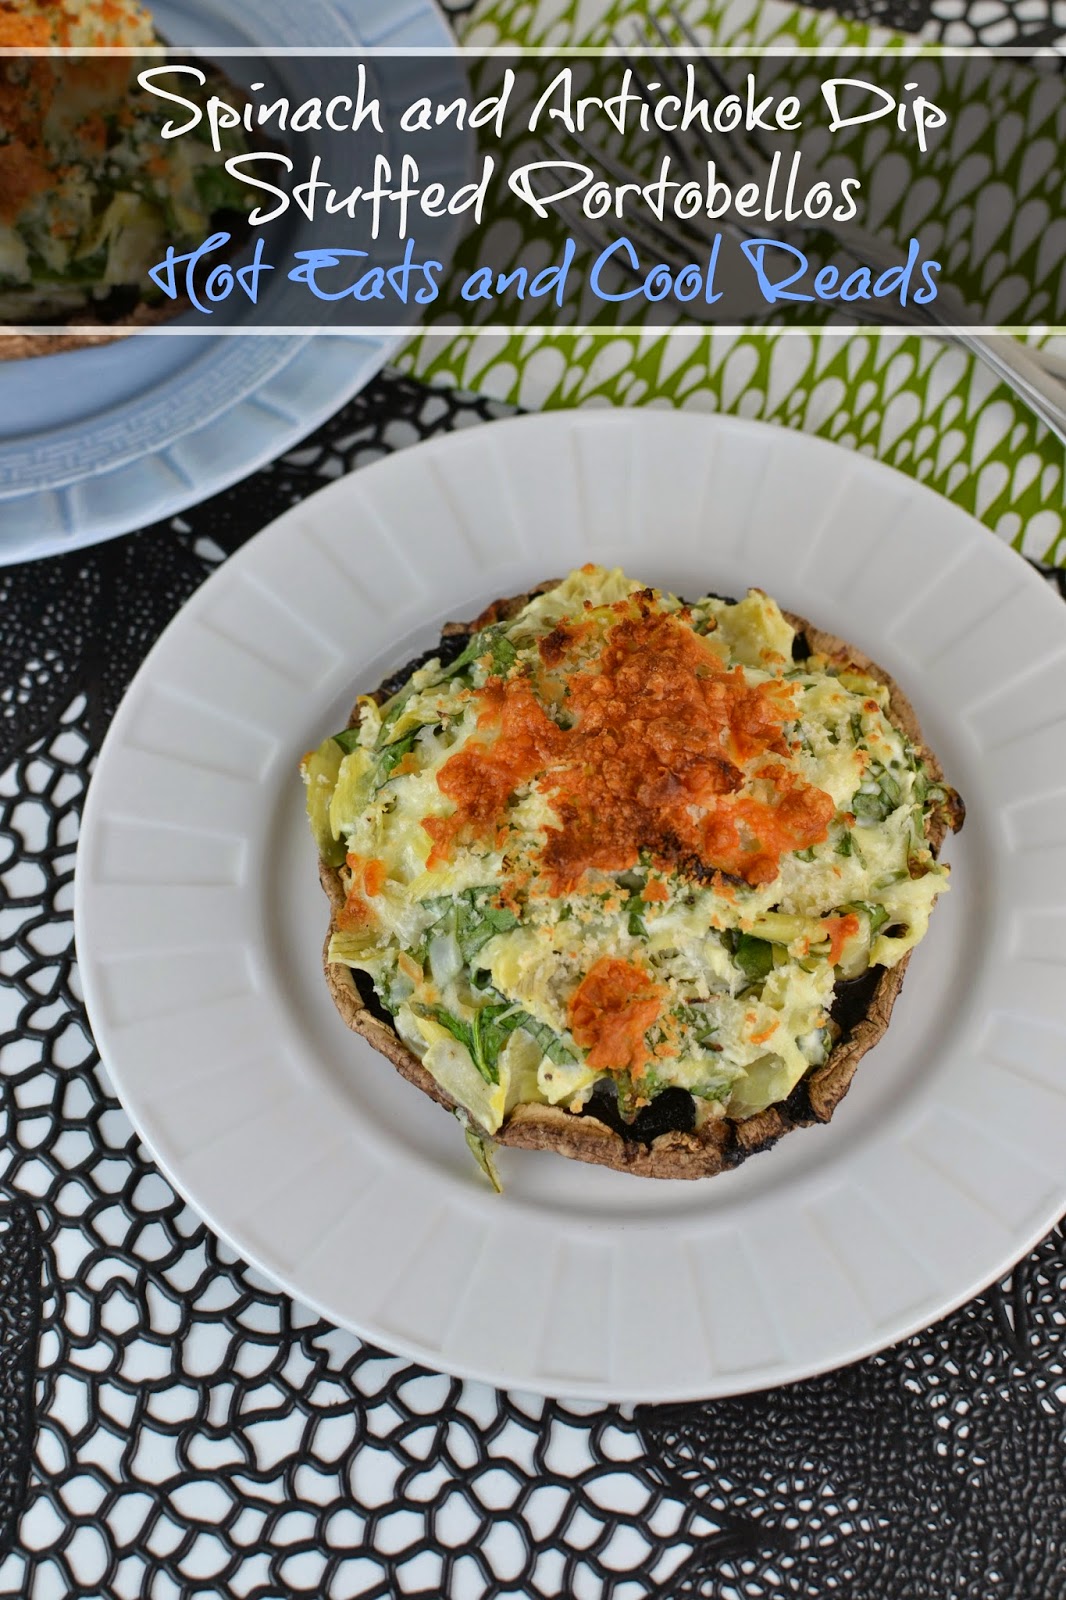 If you love Spinach and Artichoke Dip, then this recipe is for you! Perfect for dinner or an appetizer when using baby bellas! Spinach and Artichoke Dip Stuffed Portobellos from Hot Eats and Cool Reads!